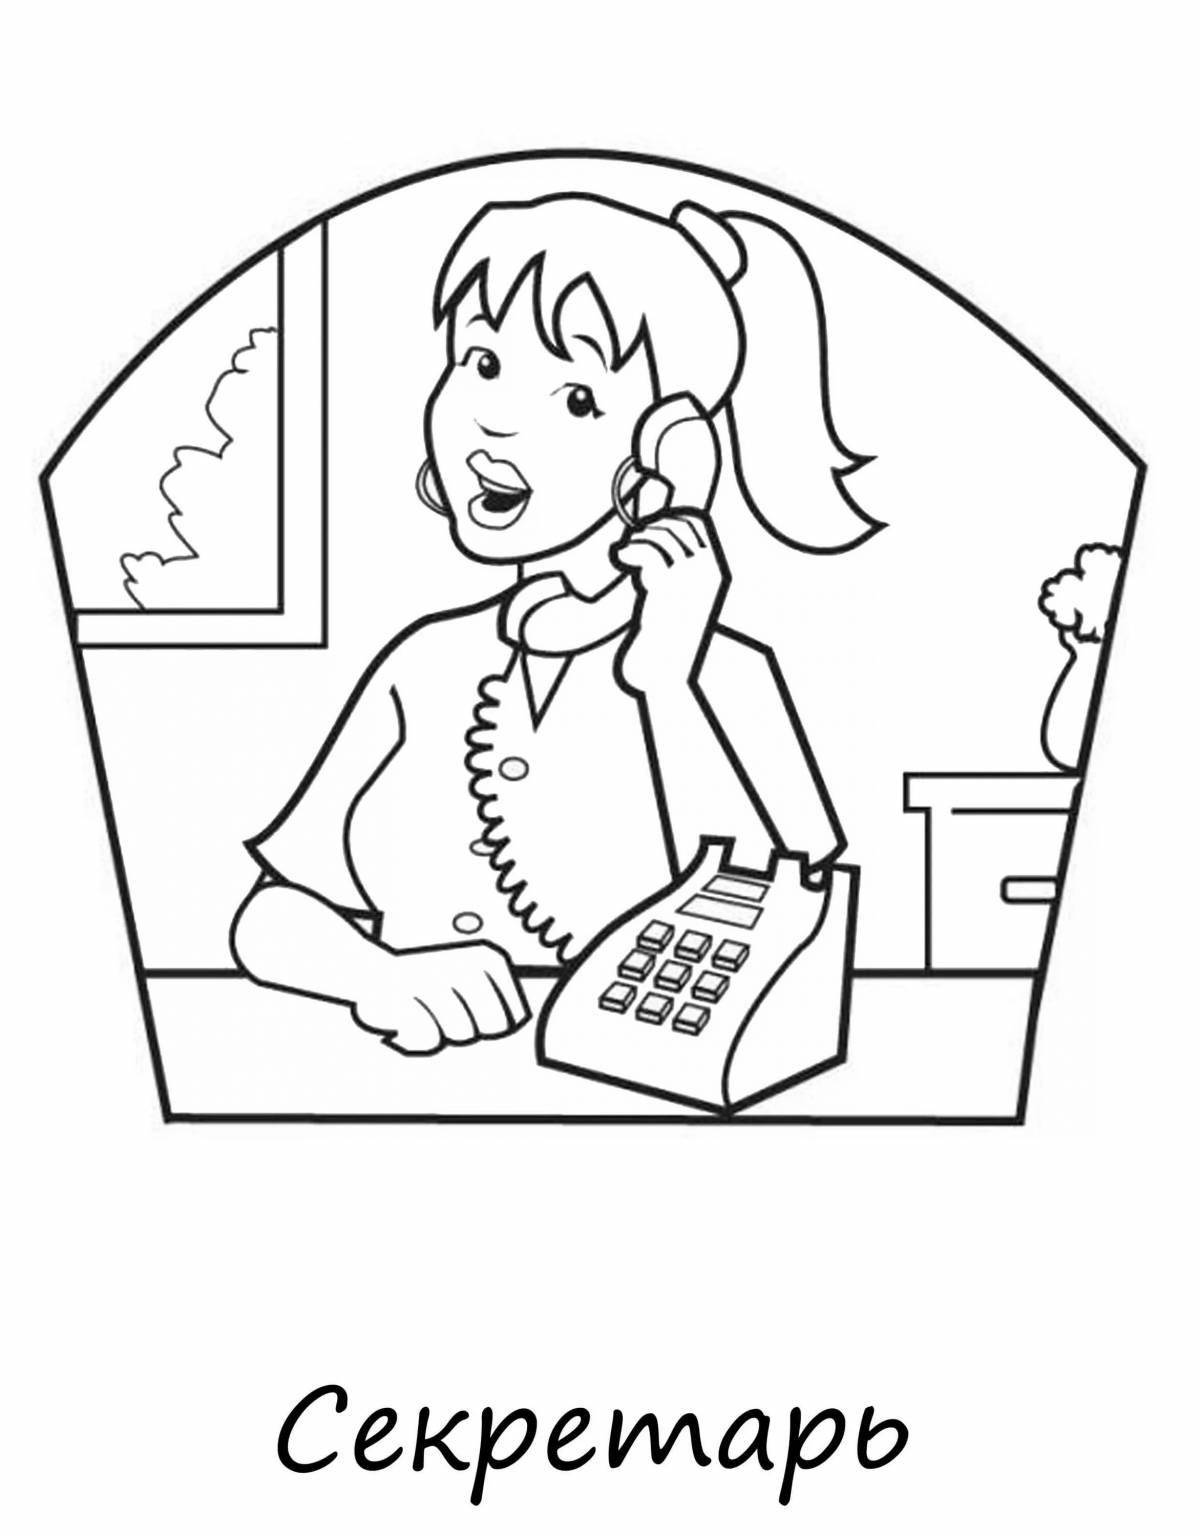 Charming accountant coloring book